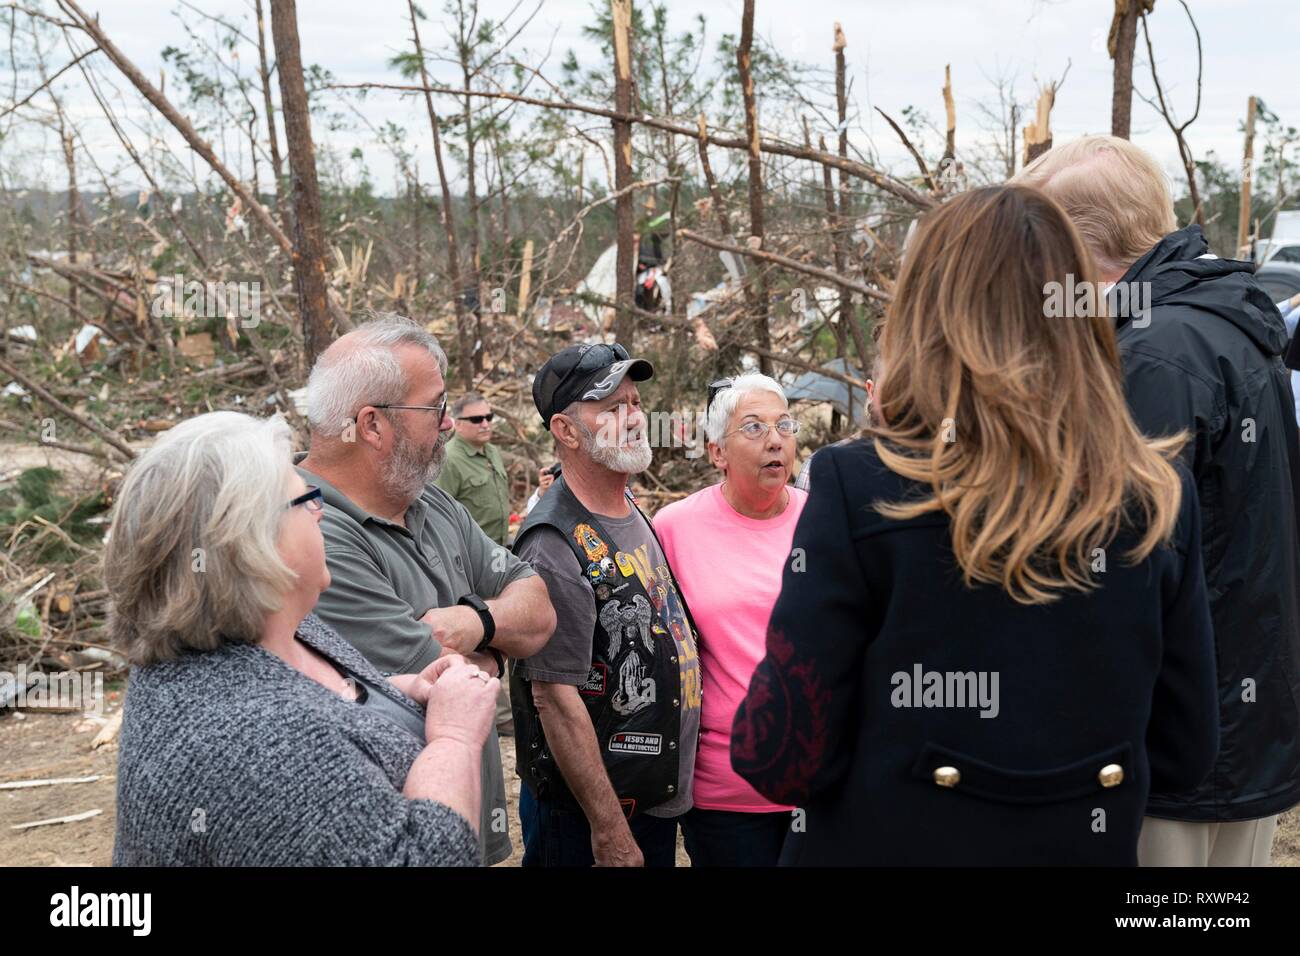 U.S First Lady Melania Trump and President Donald Trump meet with victims of a massive tornado March 8, 2019 in Lee County, Alabama. The region was hit by a tornado on March 3rd killing 23 people. Stock Photo